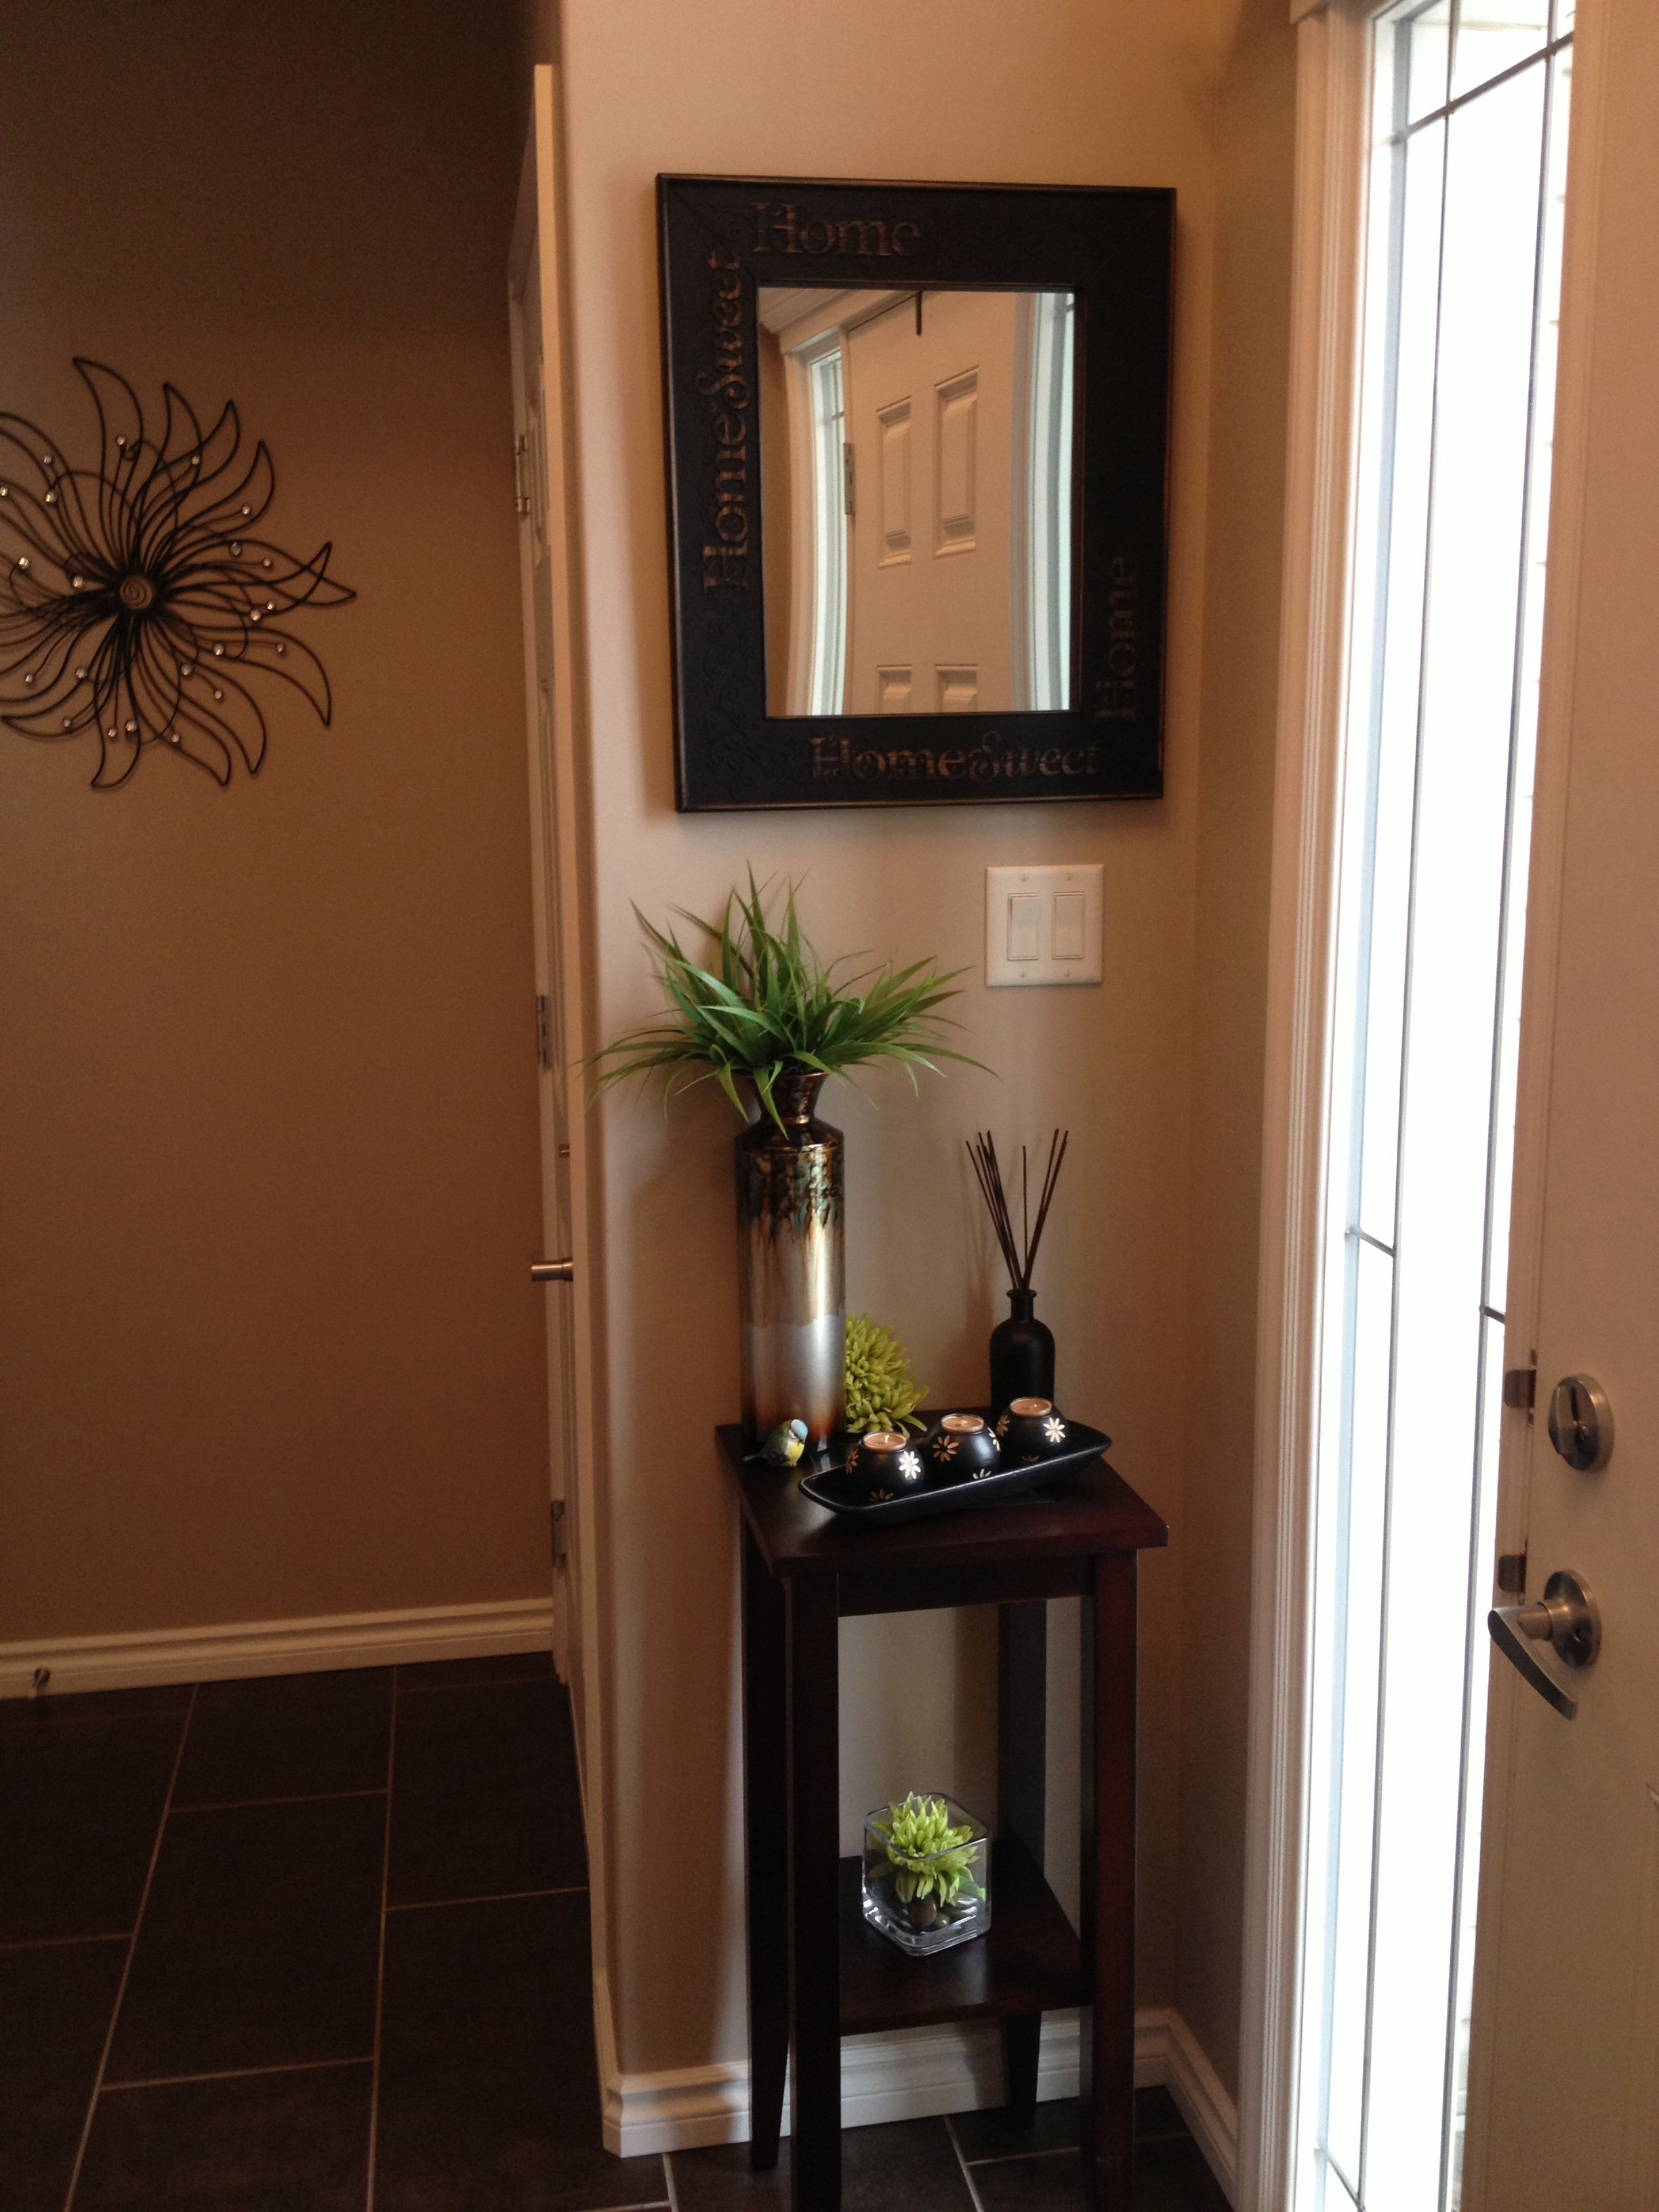 Entryway decor for small space. Like the idea of a small table, not this decor.  Like the organization of this.